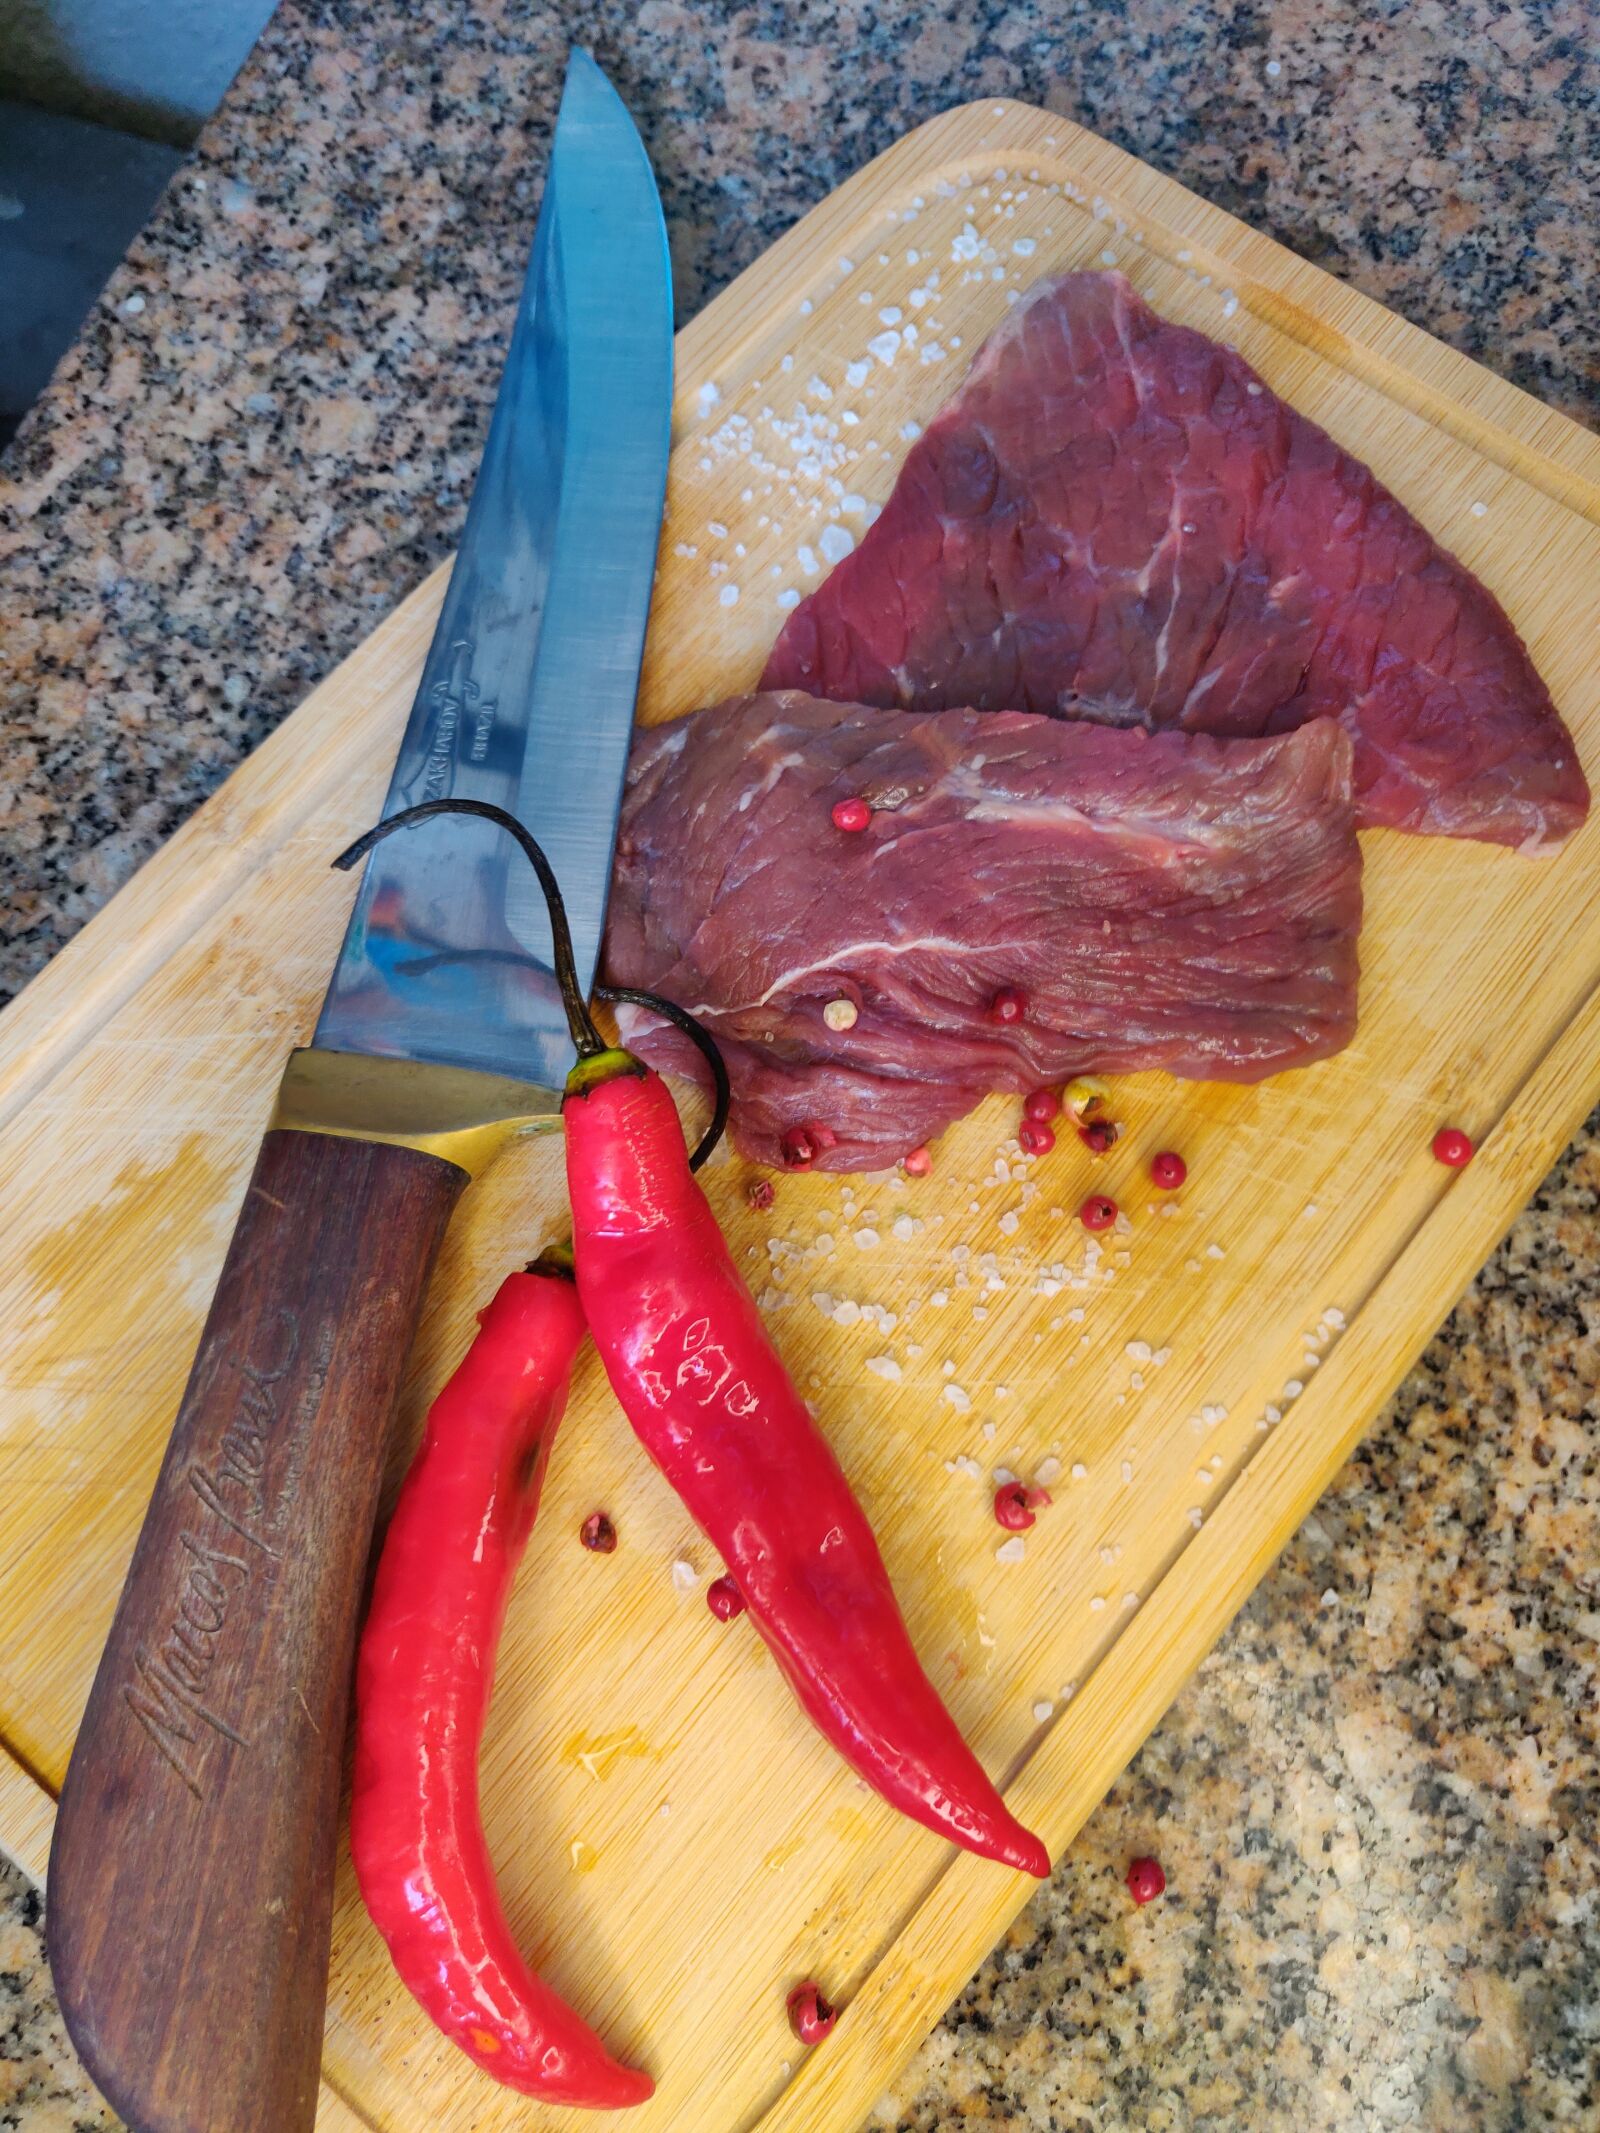 OnePlus A6003 sample photo. Beef, pepper, food photography